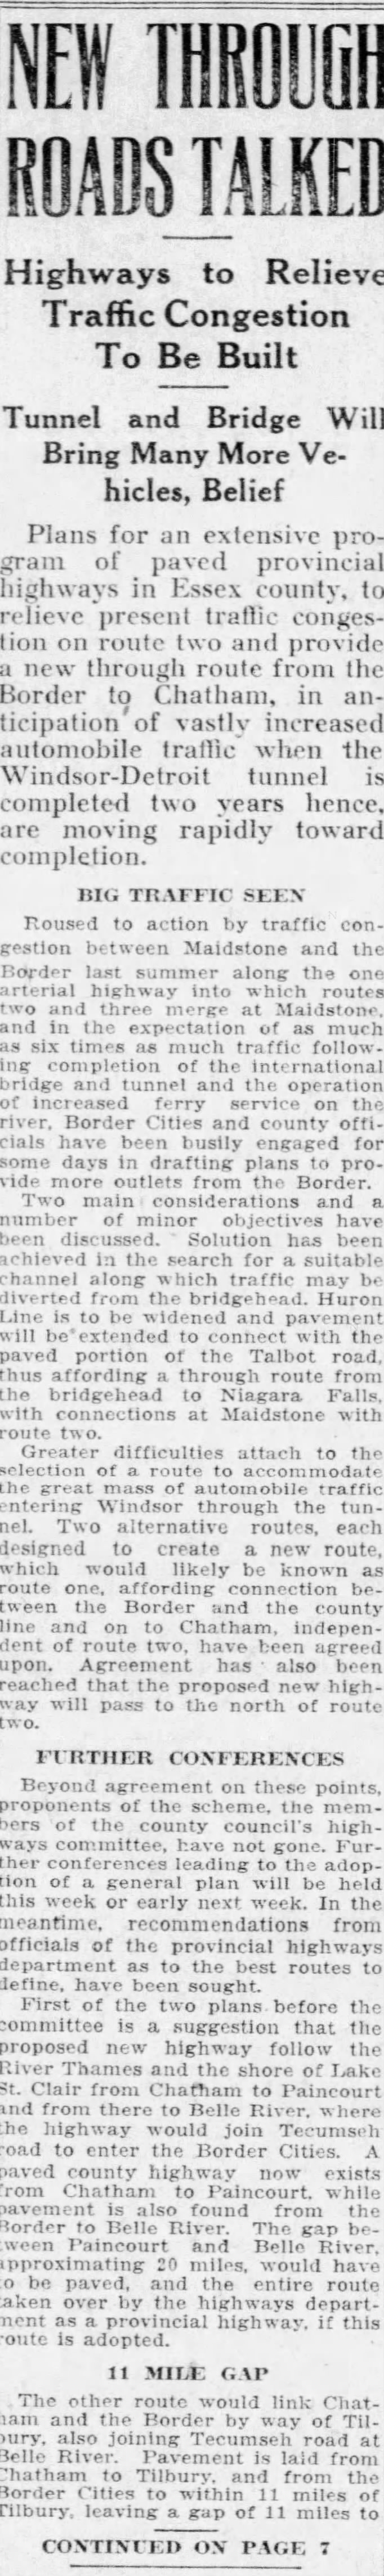 Ontario Highway 2 new routes following Ambassador Bridge completion. Part 1 of 2